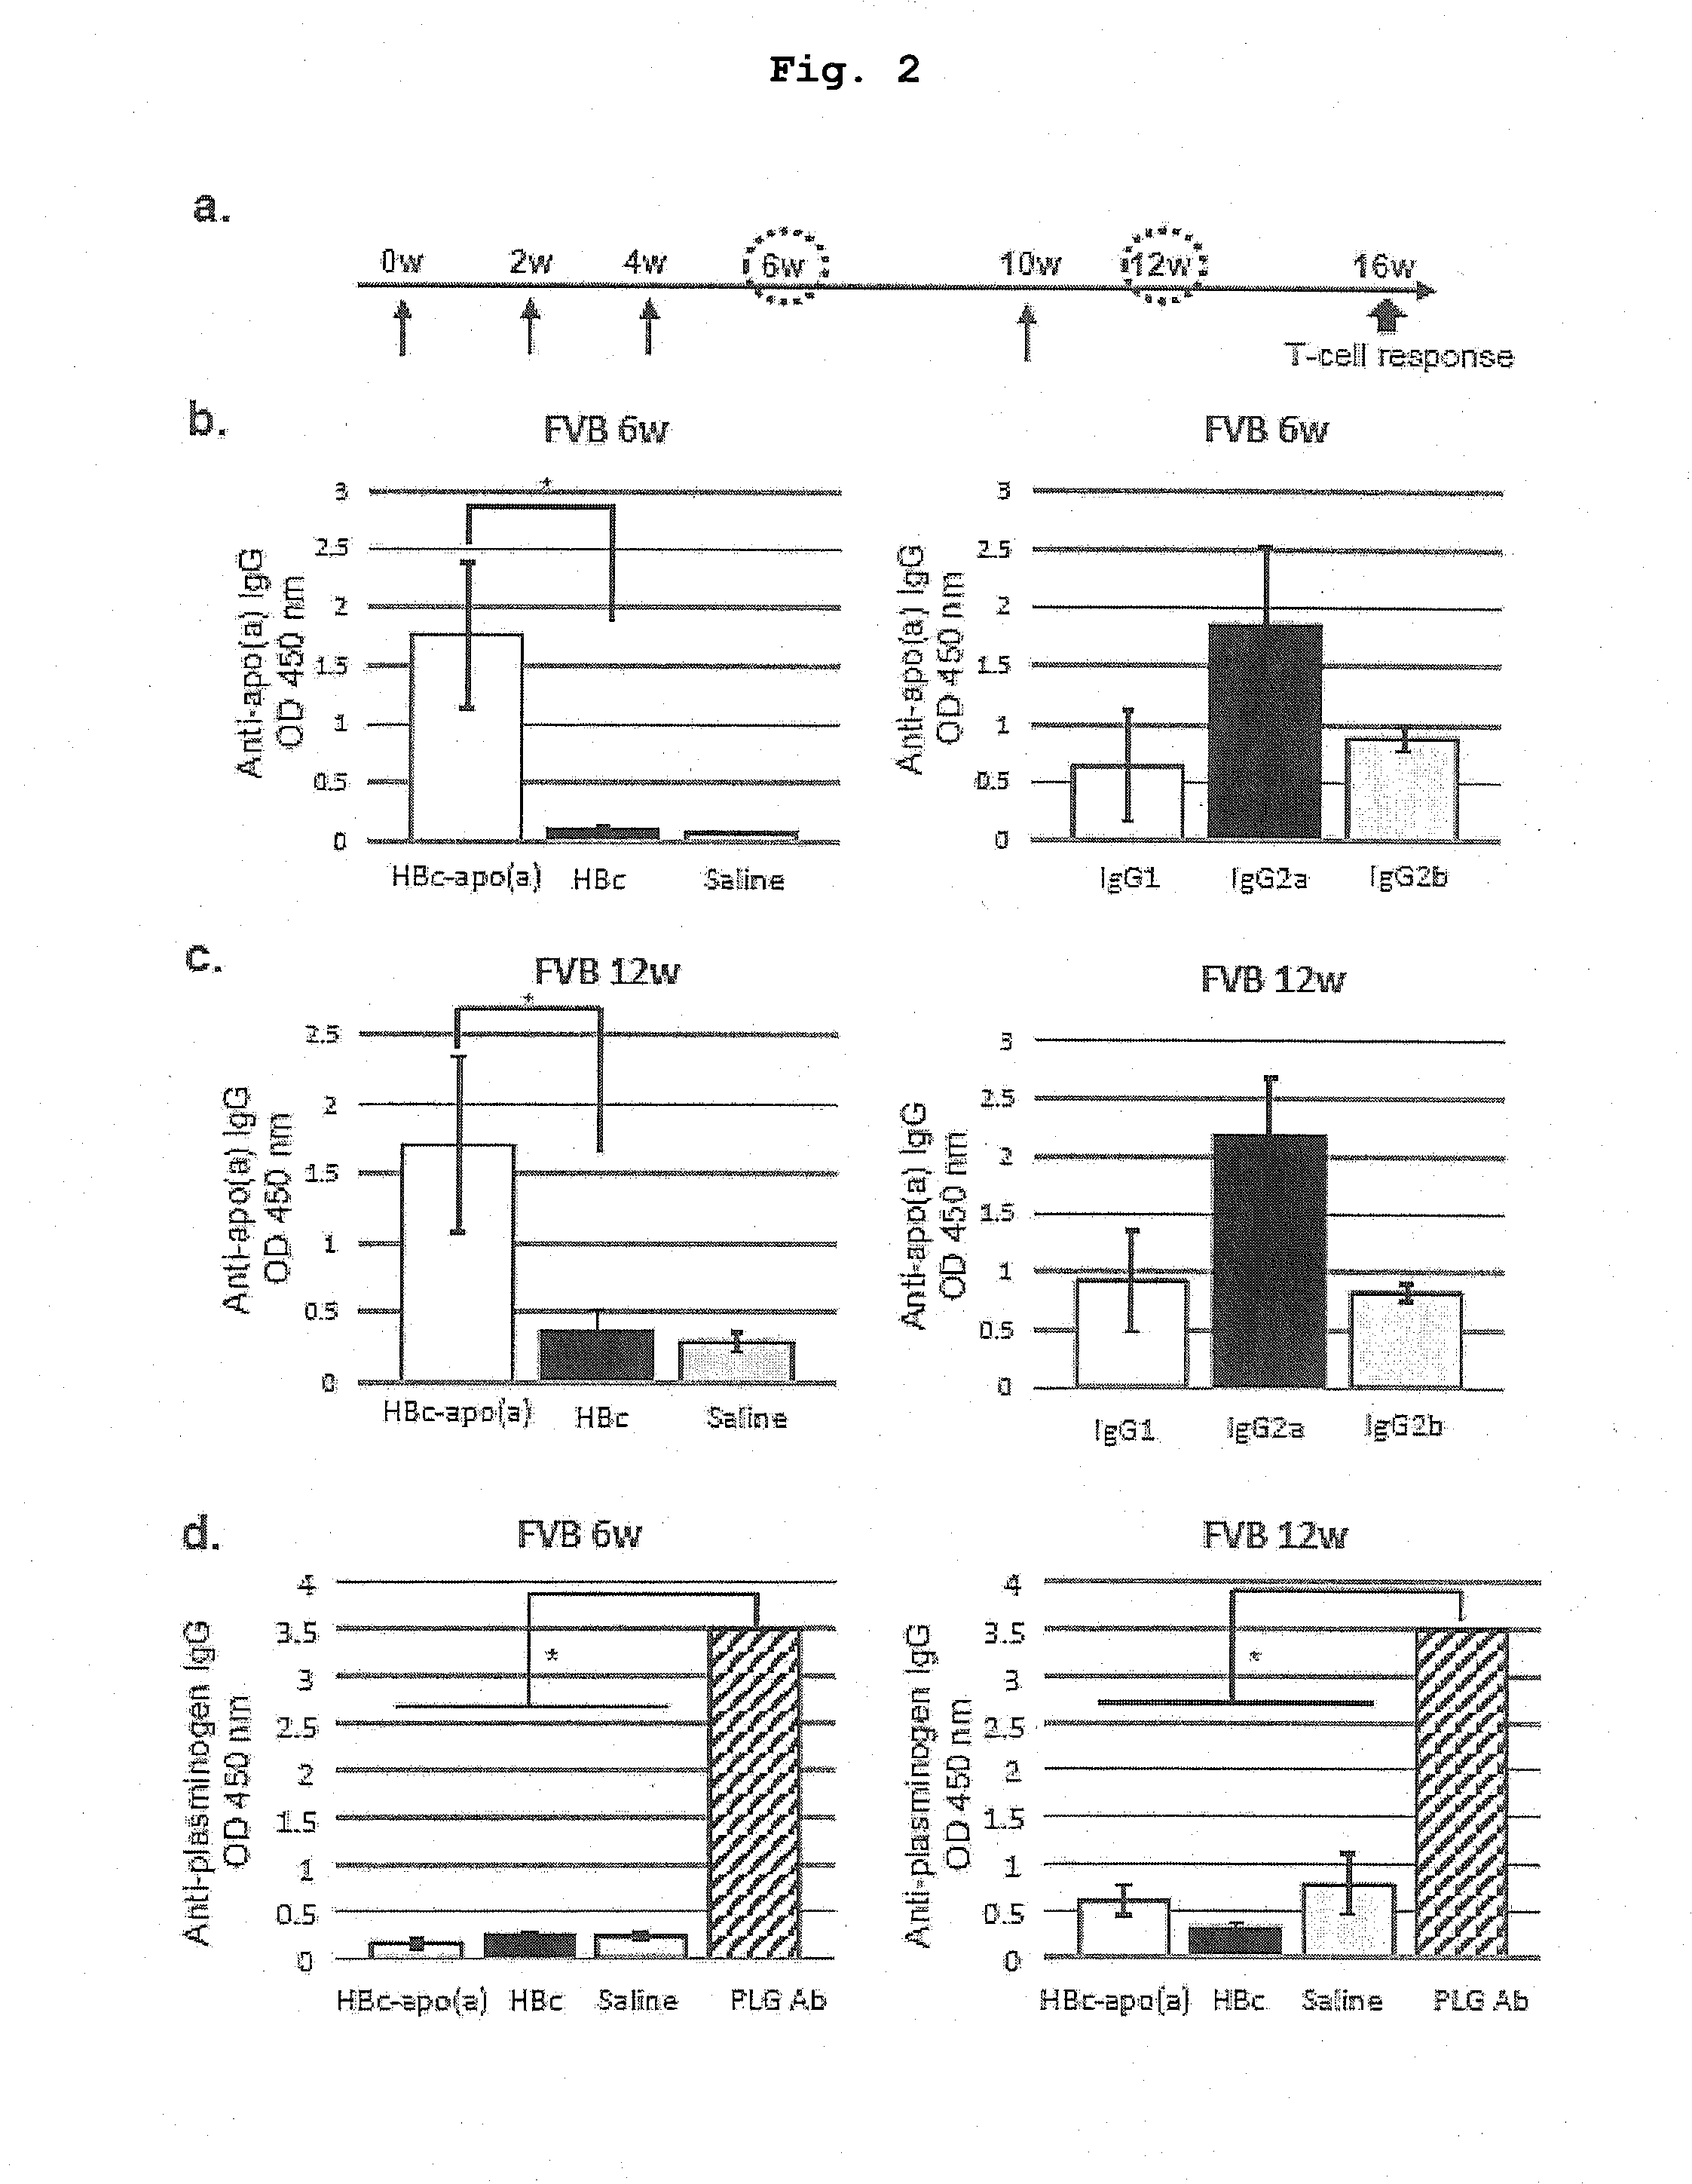 DNA VACCINE CONTAINING SPECIFIC EPITOPE OF APOLIPOPROTEIN (a)